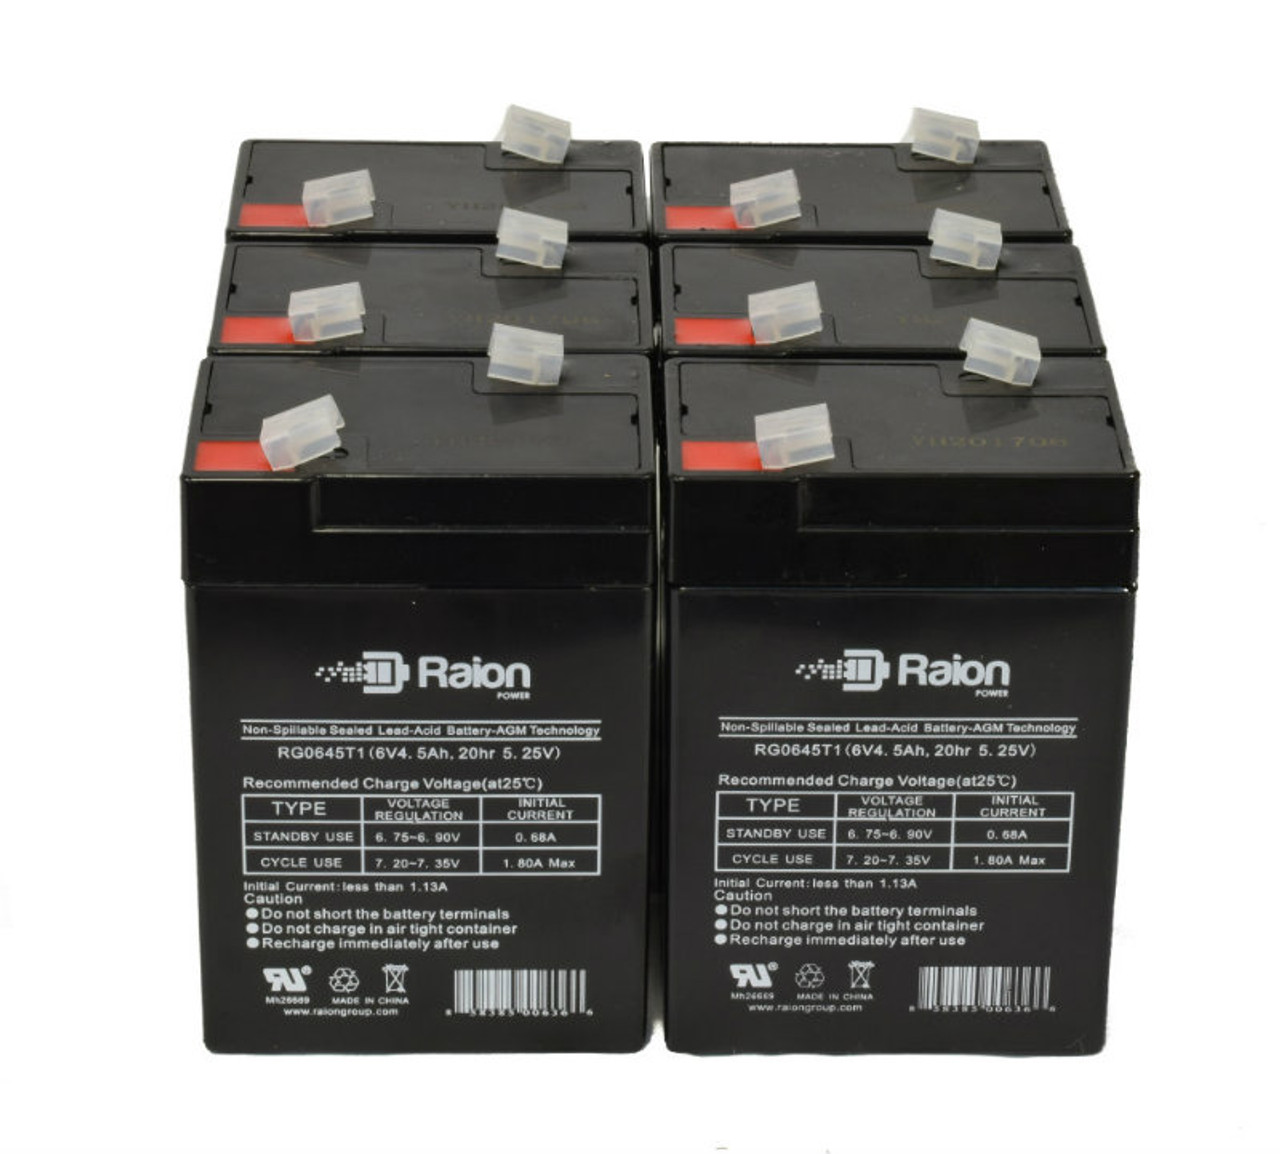 Raion Power 6 Volt 4.5Ah RG0645T1 Replacement Battery for Panasonic LC-R065P - 6 Pack